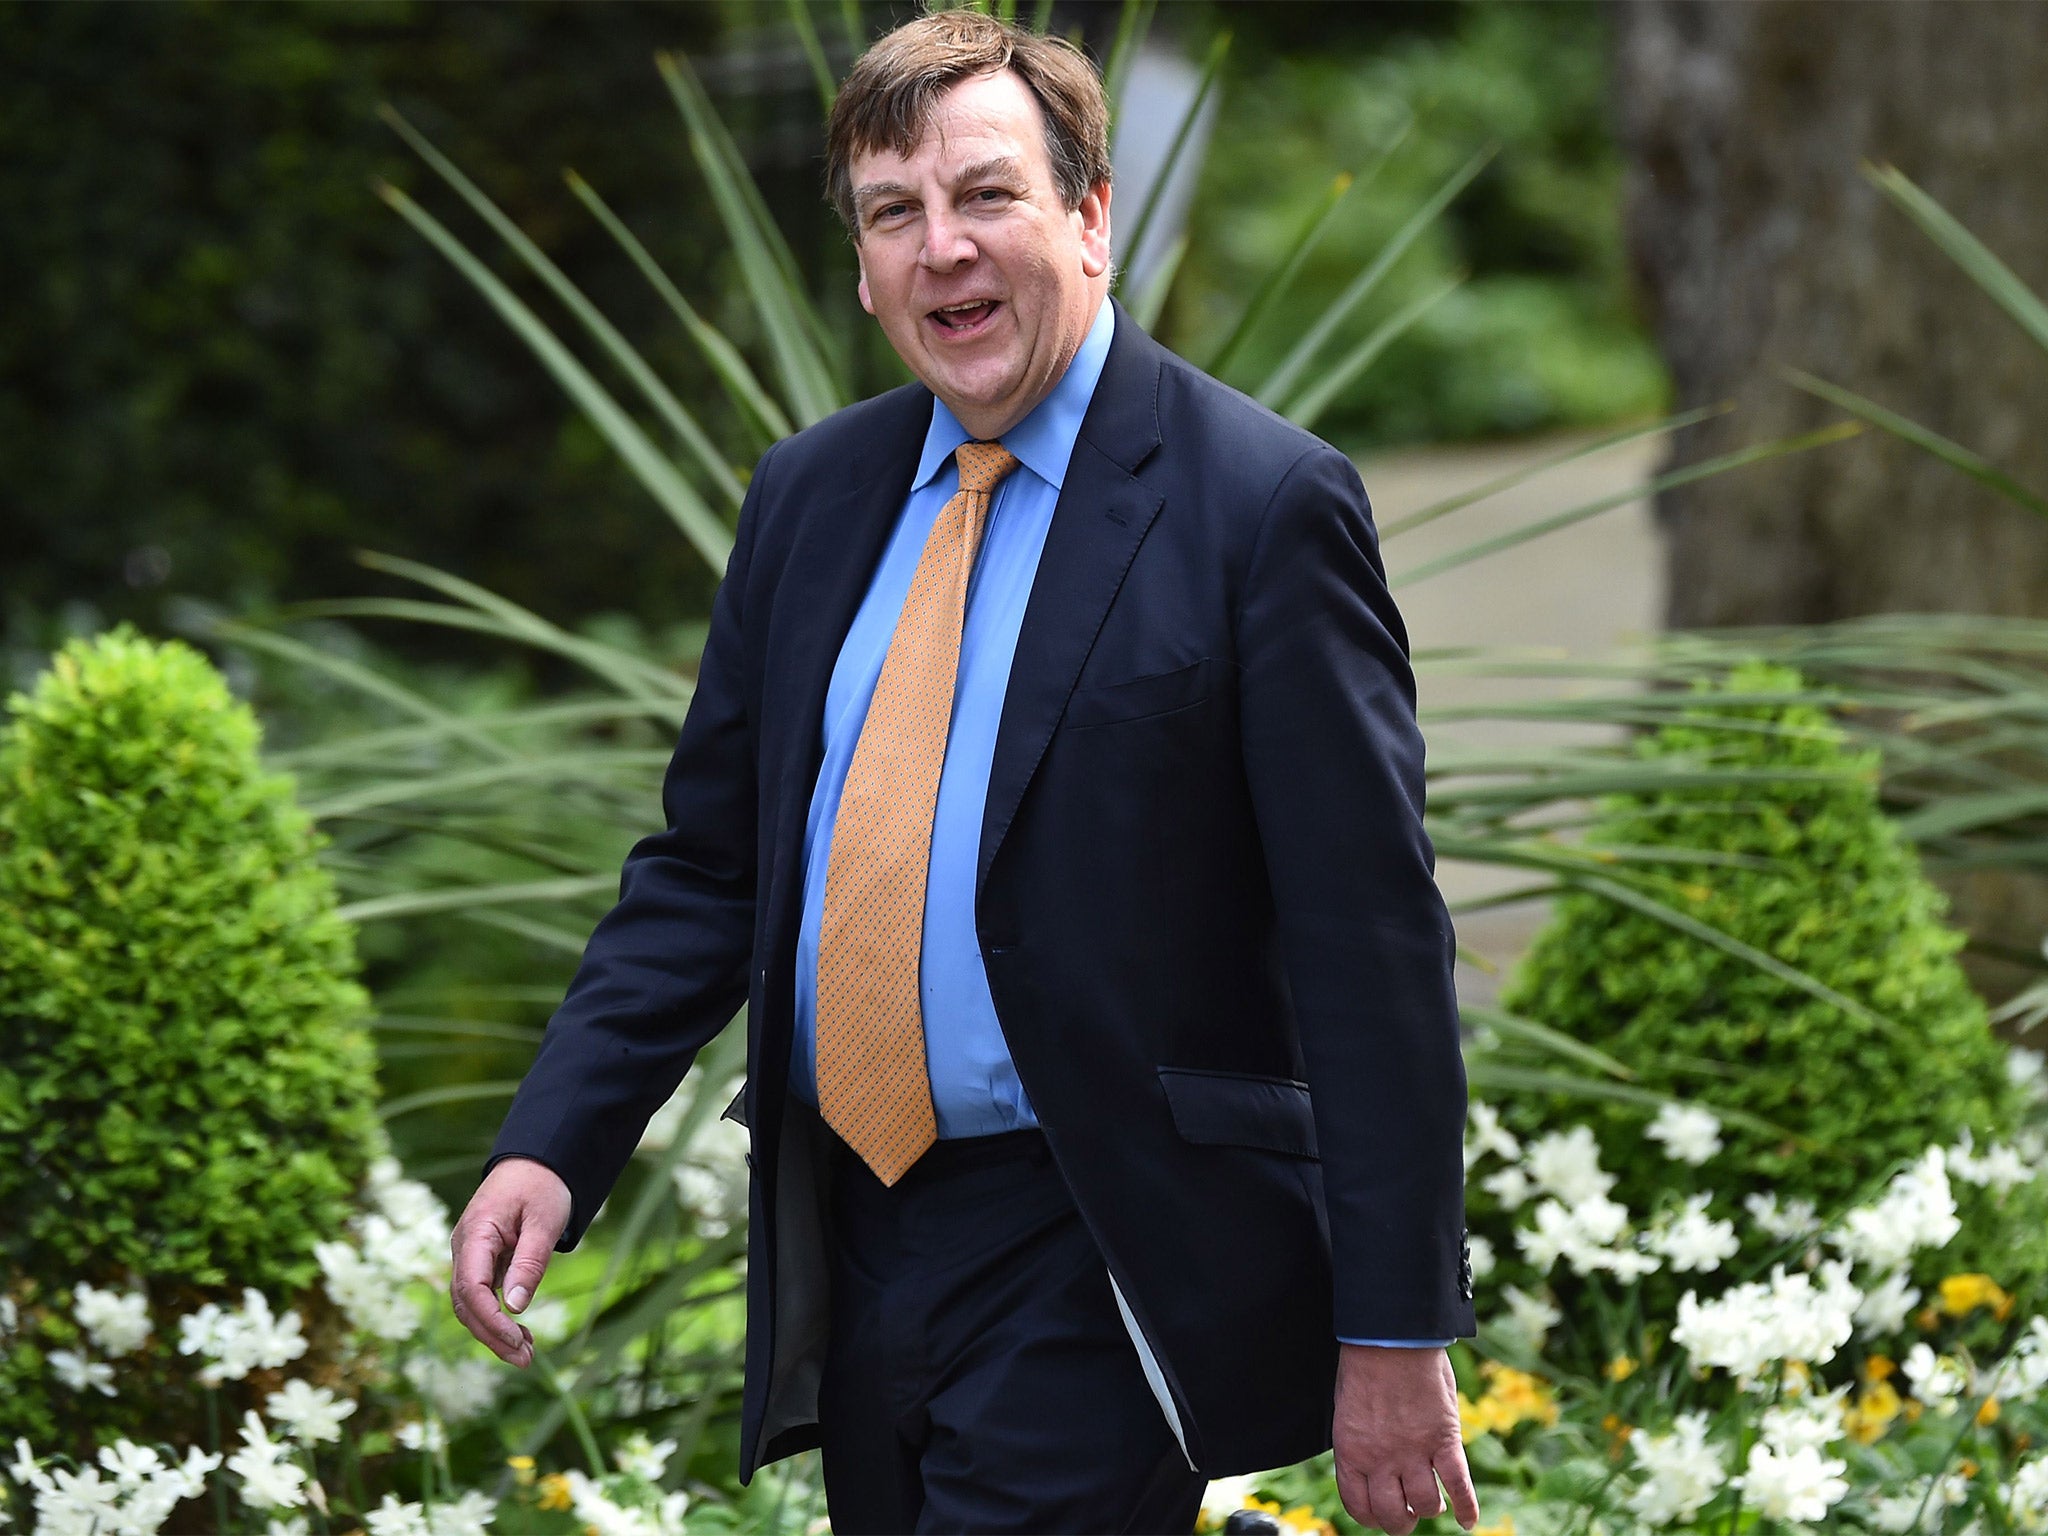 John Whittingdale, the new Secretary of State for Culture, Media and Sport